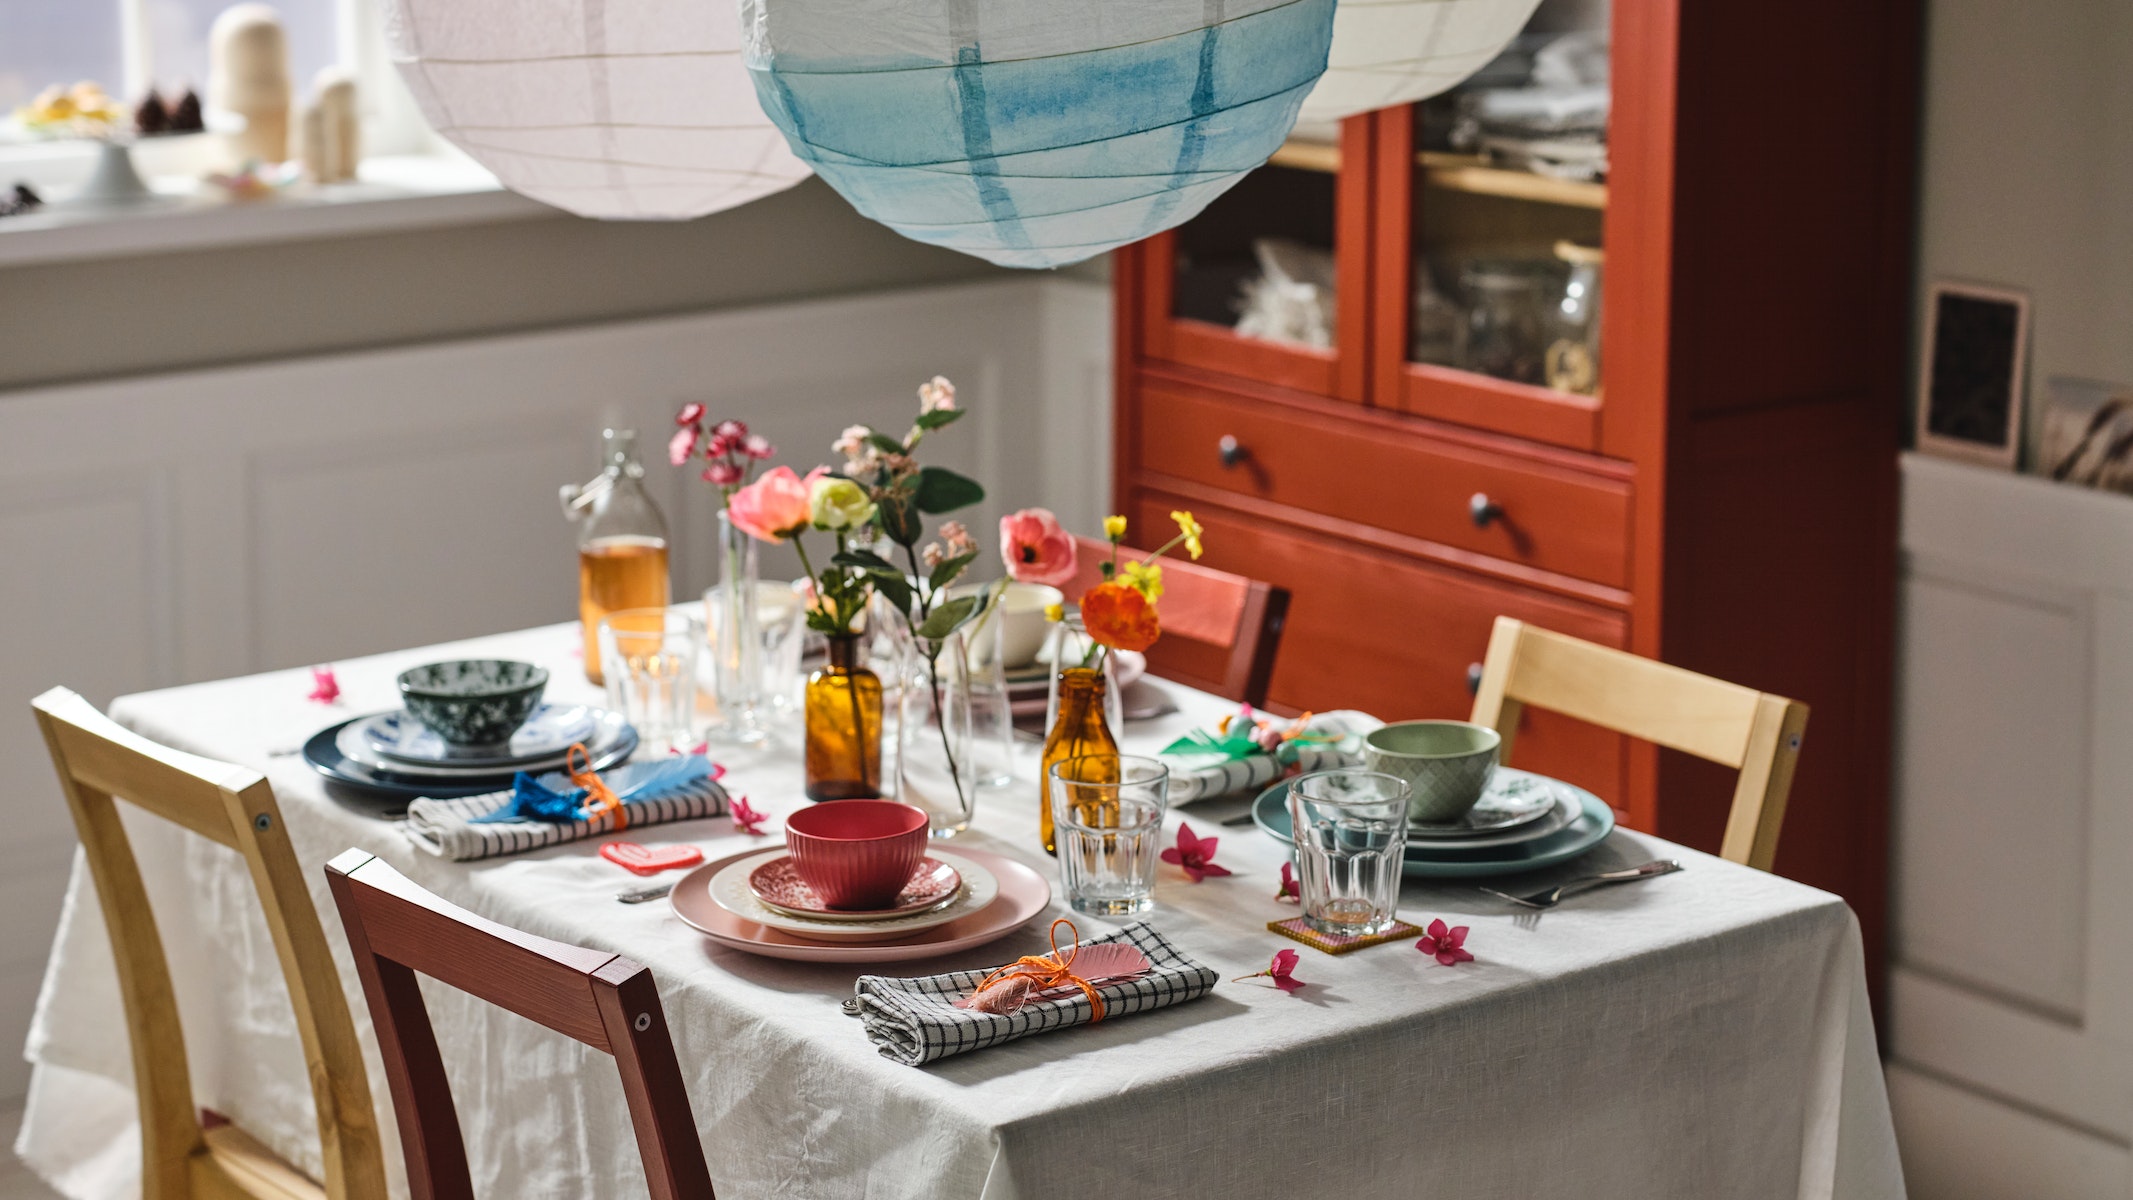 IKEA - Crafty décor and table setting ideas for a teen party